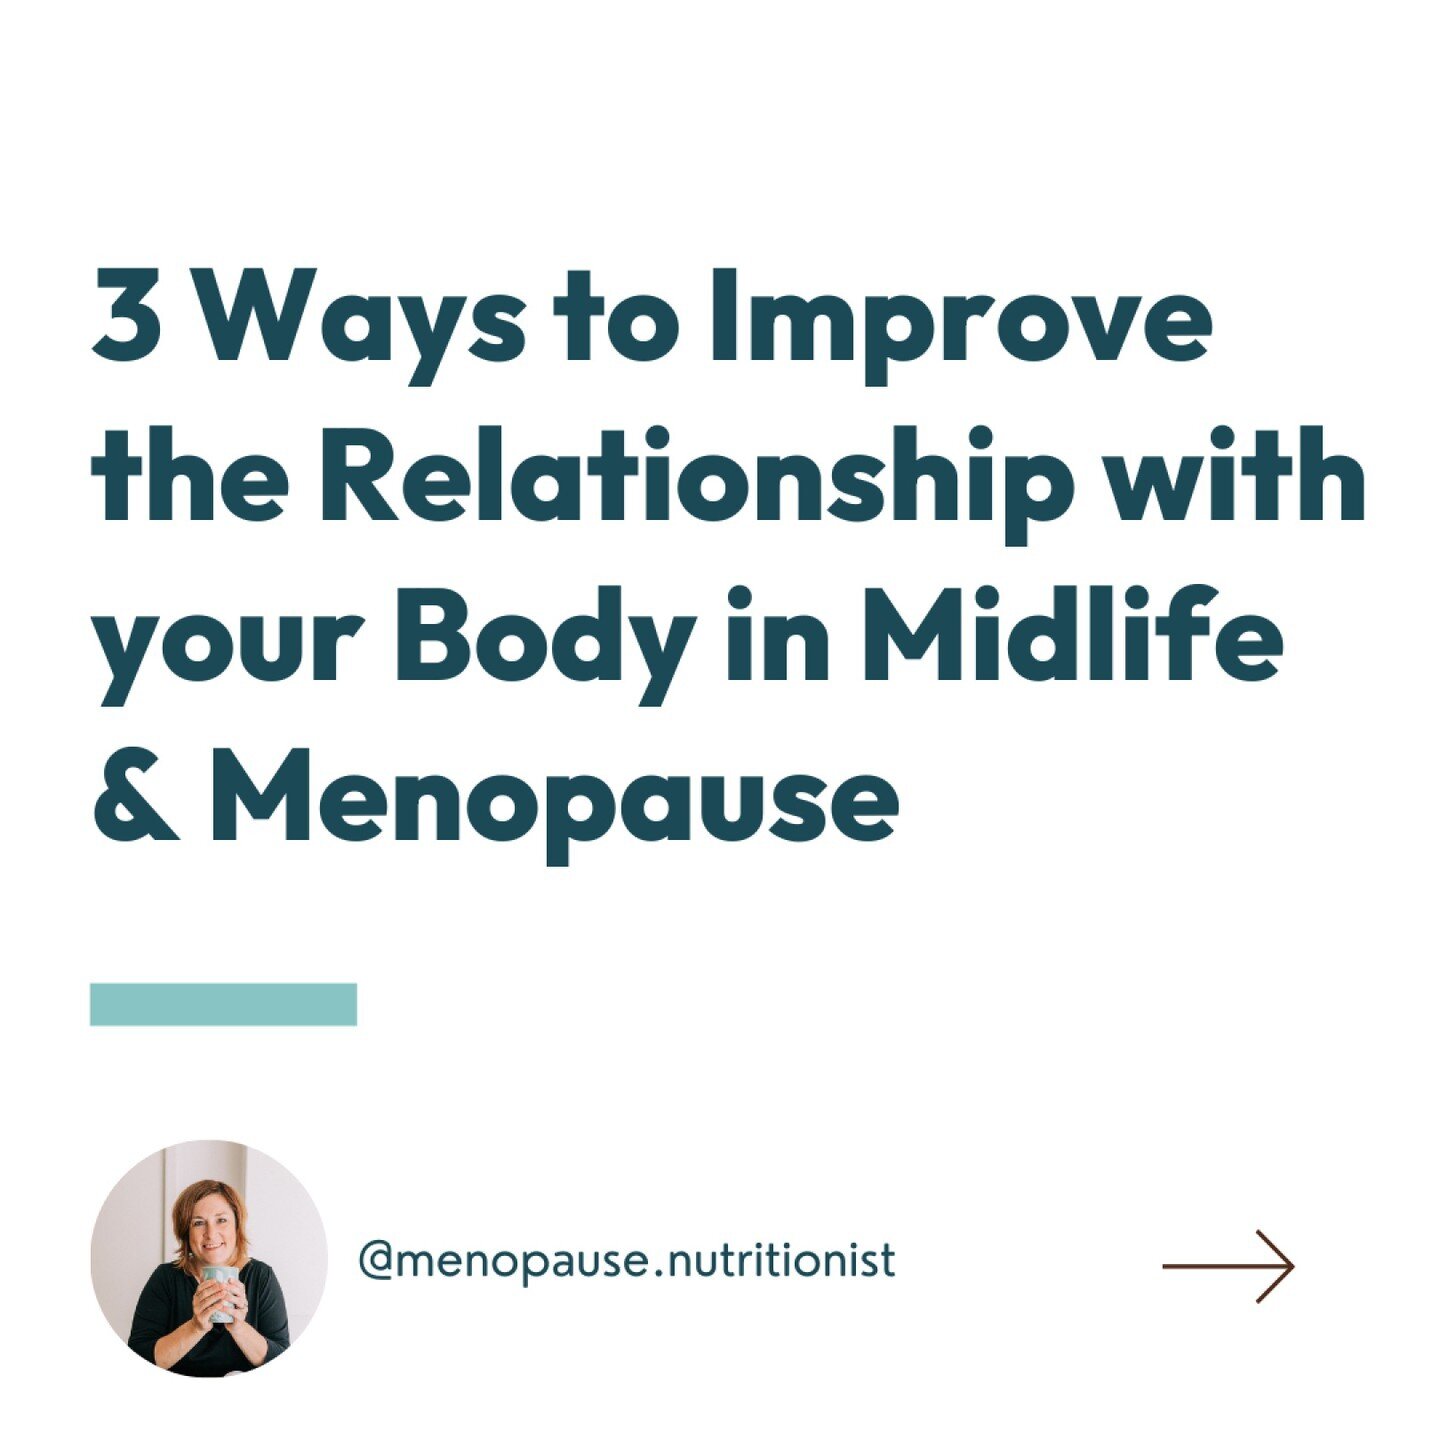 How would you describe the relationship with your body?

Most healthy relationships are built on a foundation of:

✨Respect
✨Kindness
✨Appreciation

But that's not how I would have defined it before learning to work *with* my body instead of against 